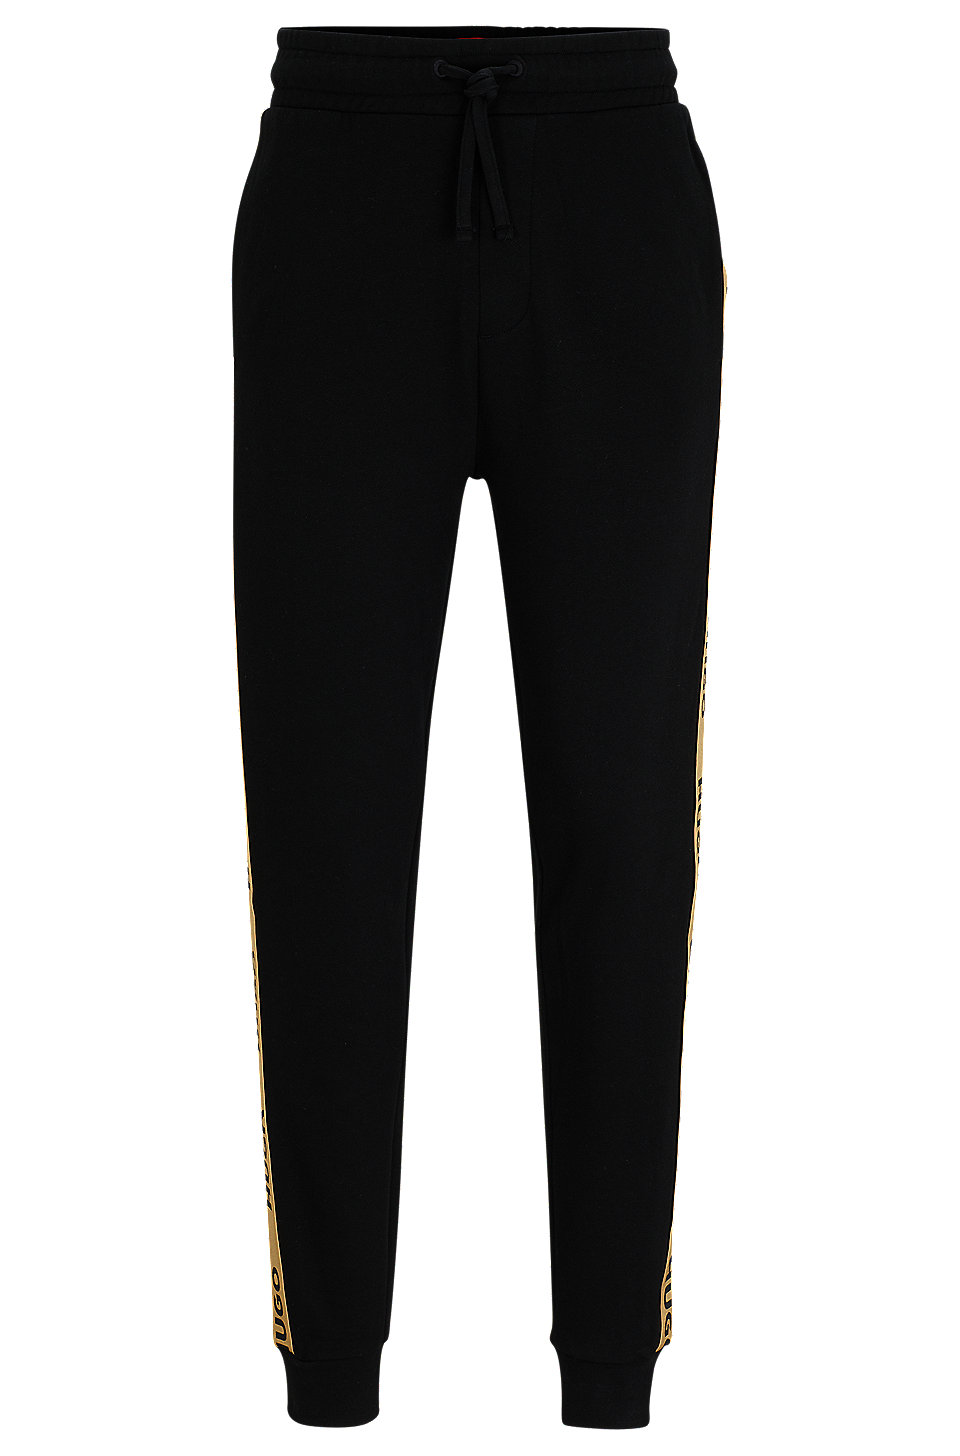 HUGO - Cuffed tracksuit bottoms in with logo tape